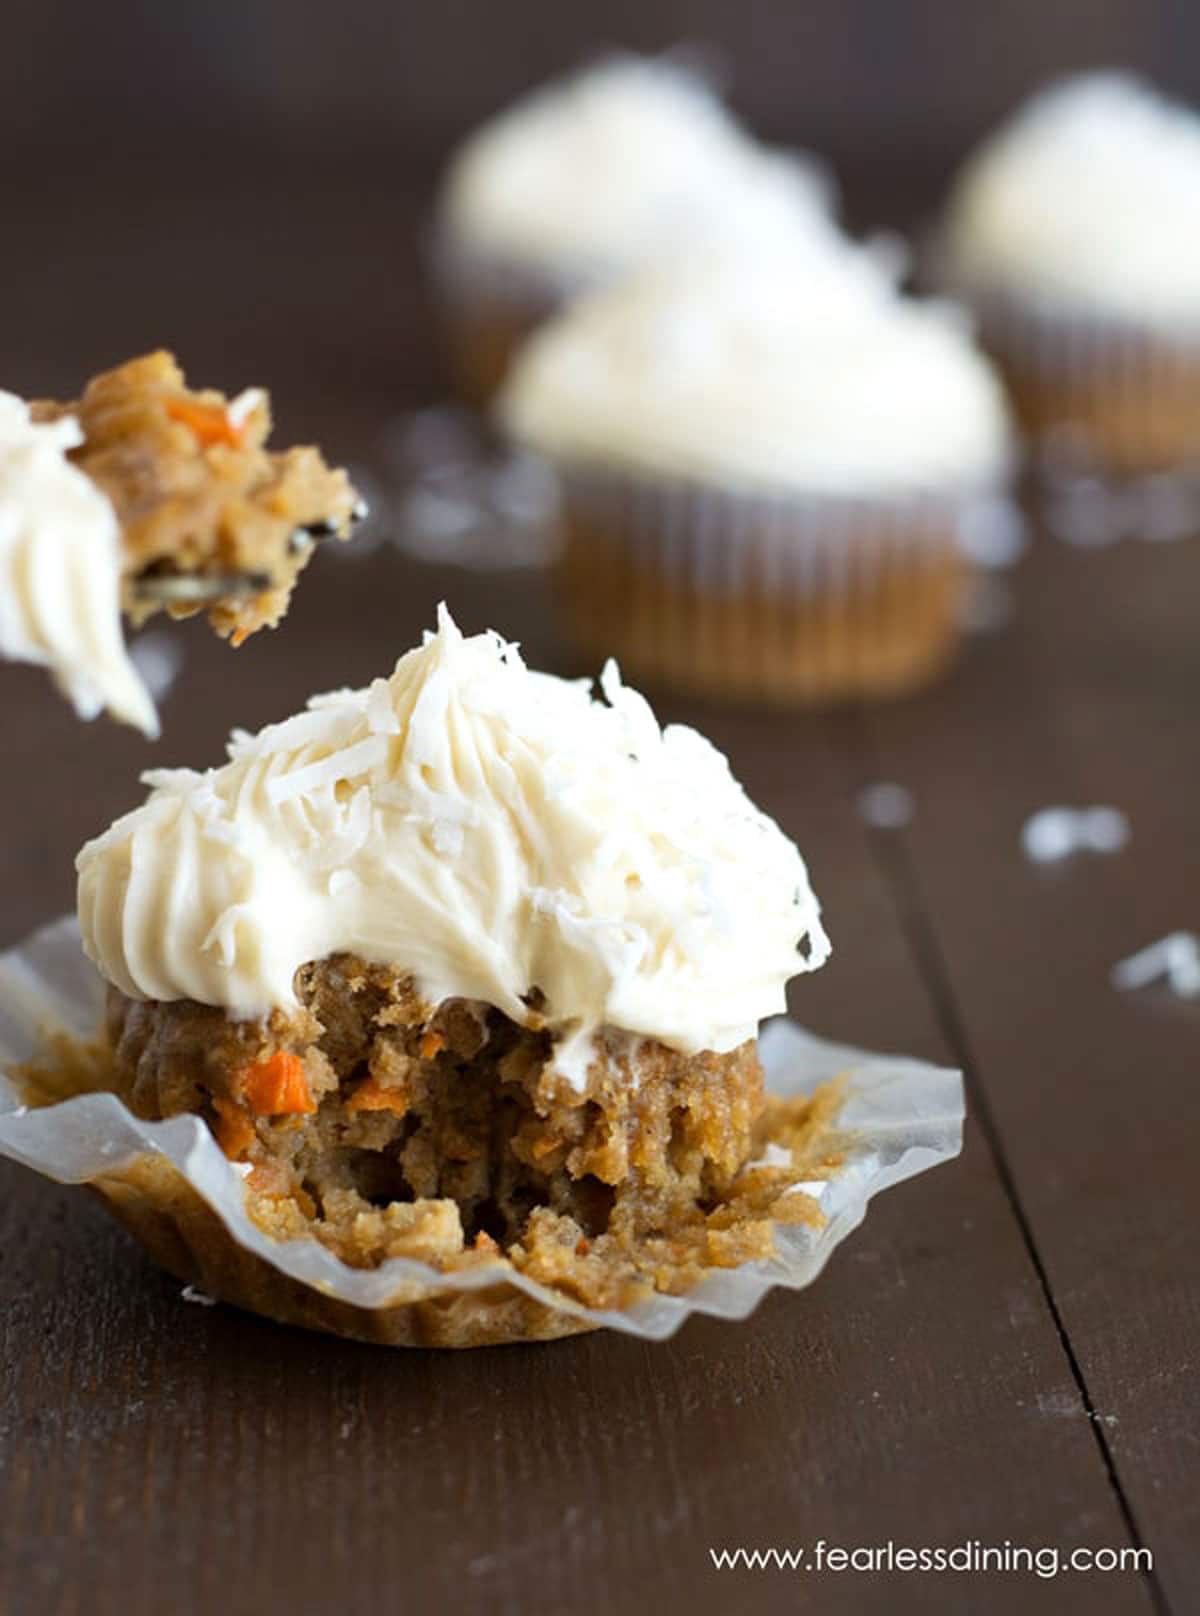 A carrot cupcake with a bite taken out.